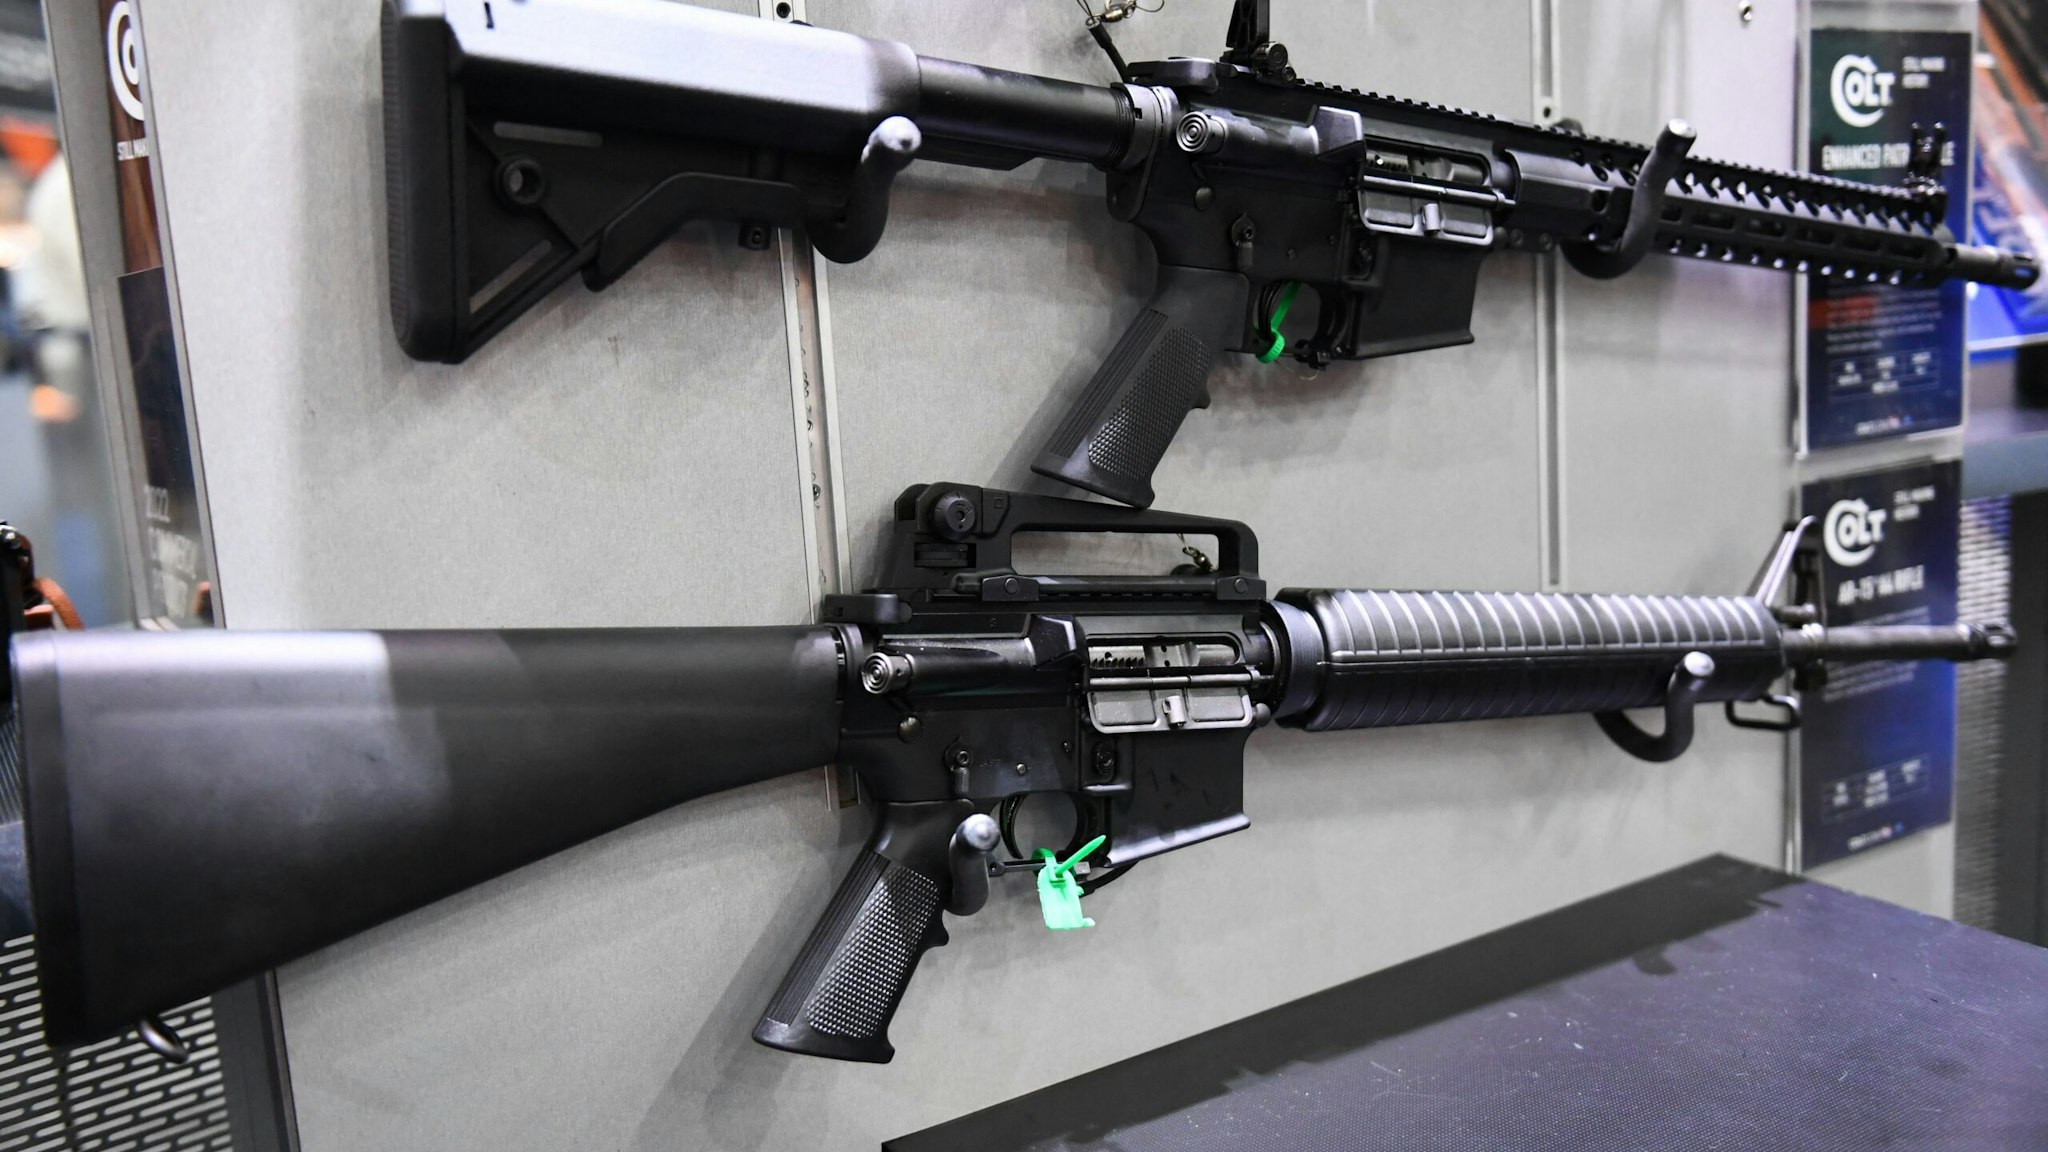 Virginia Rep. Donald Beyer wants to impose a 1,000% tax on AR-15s and similar rifles